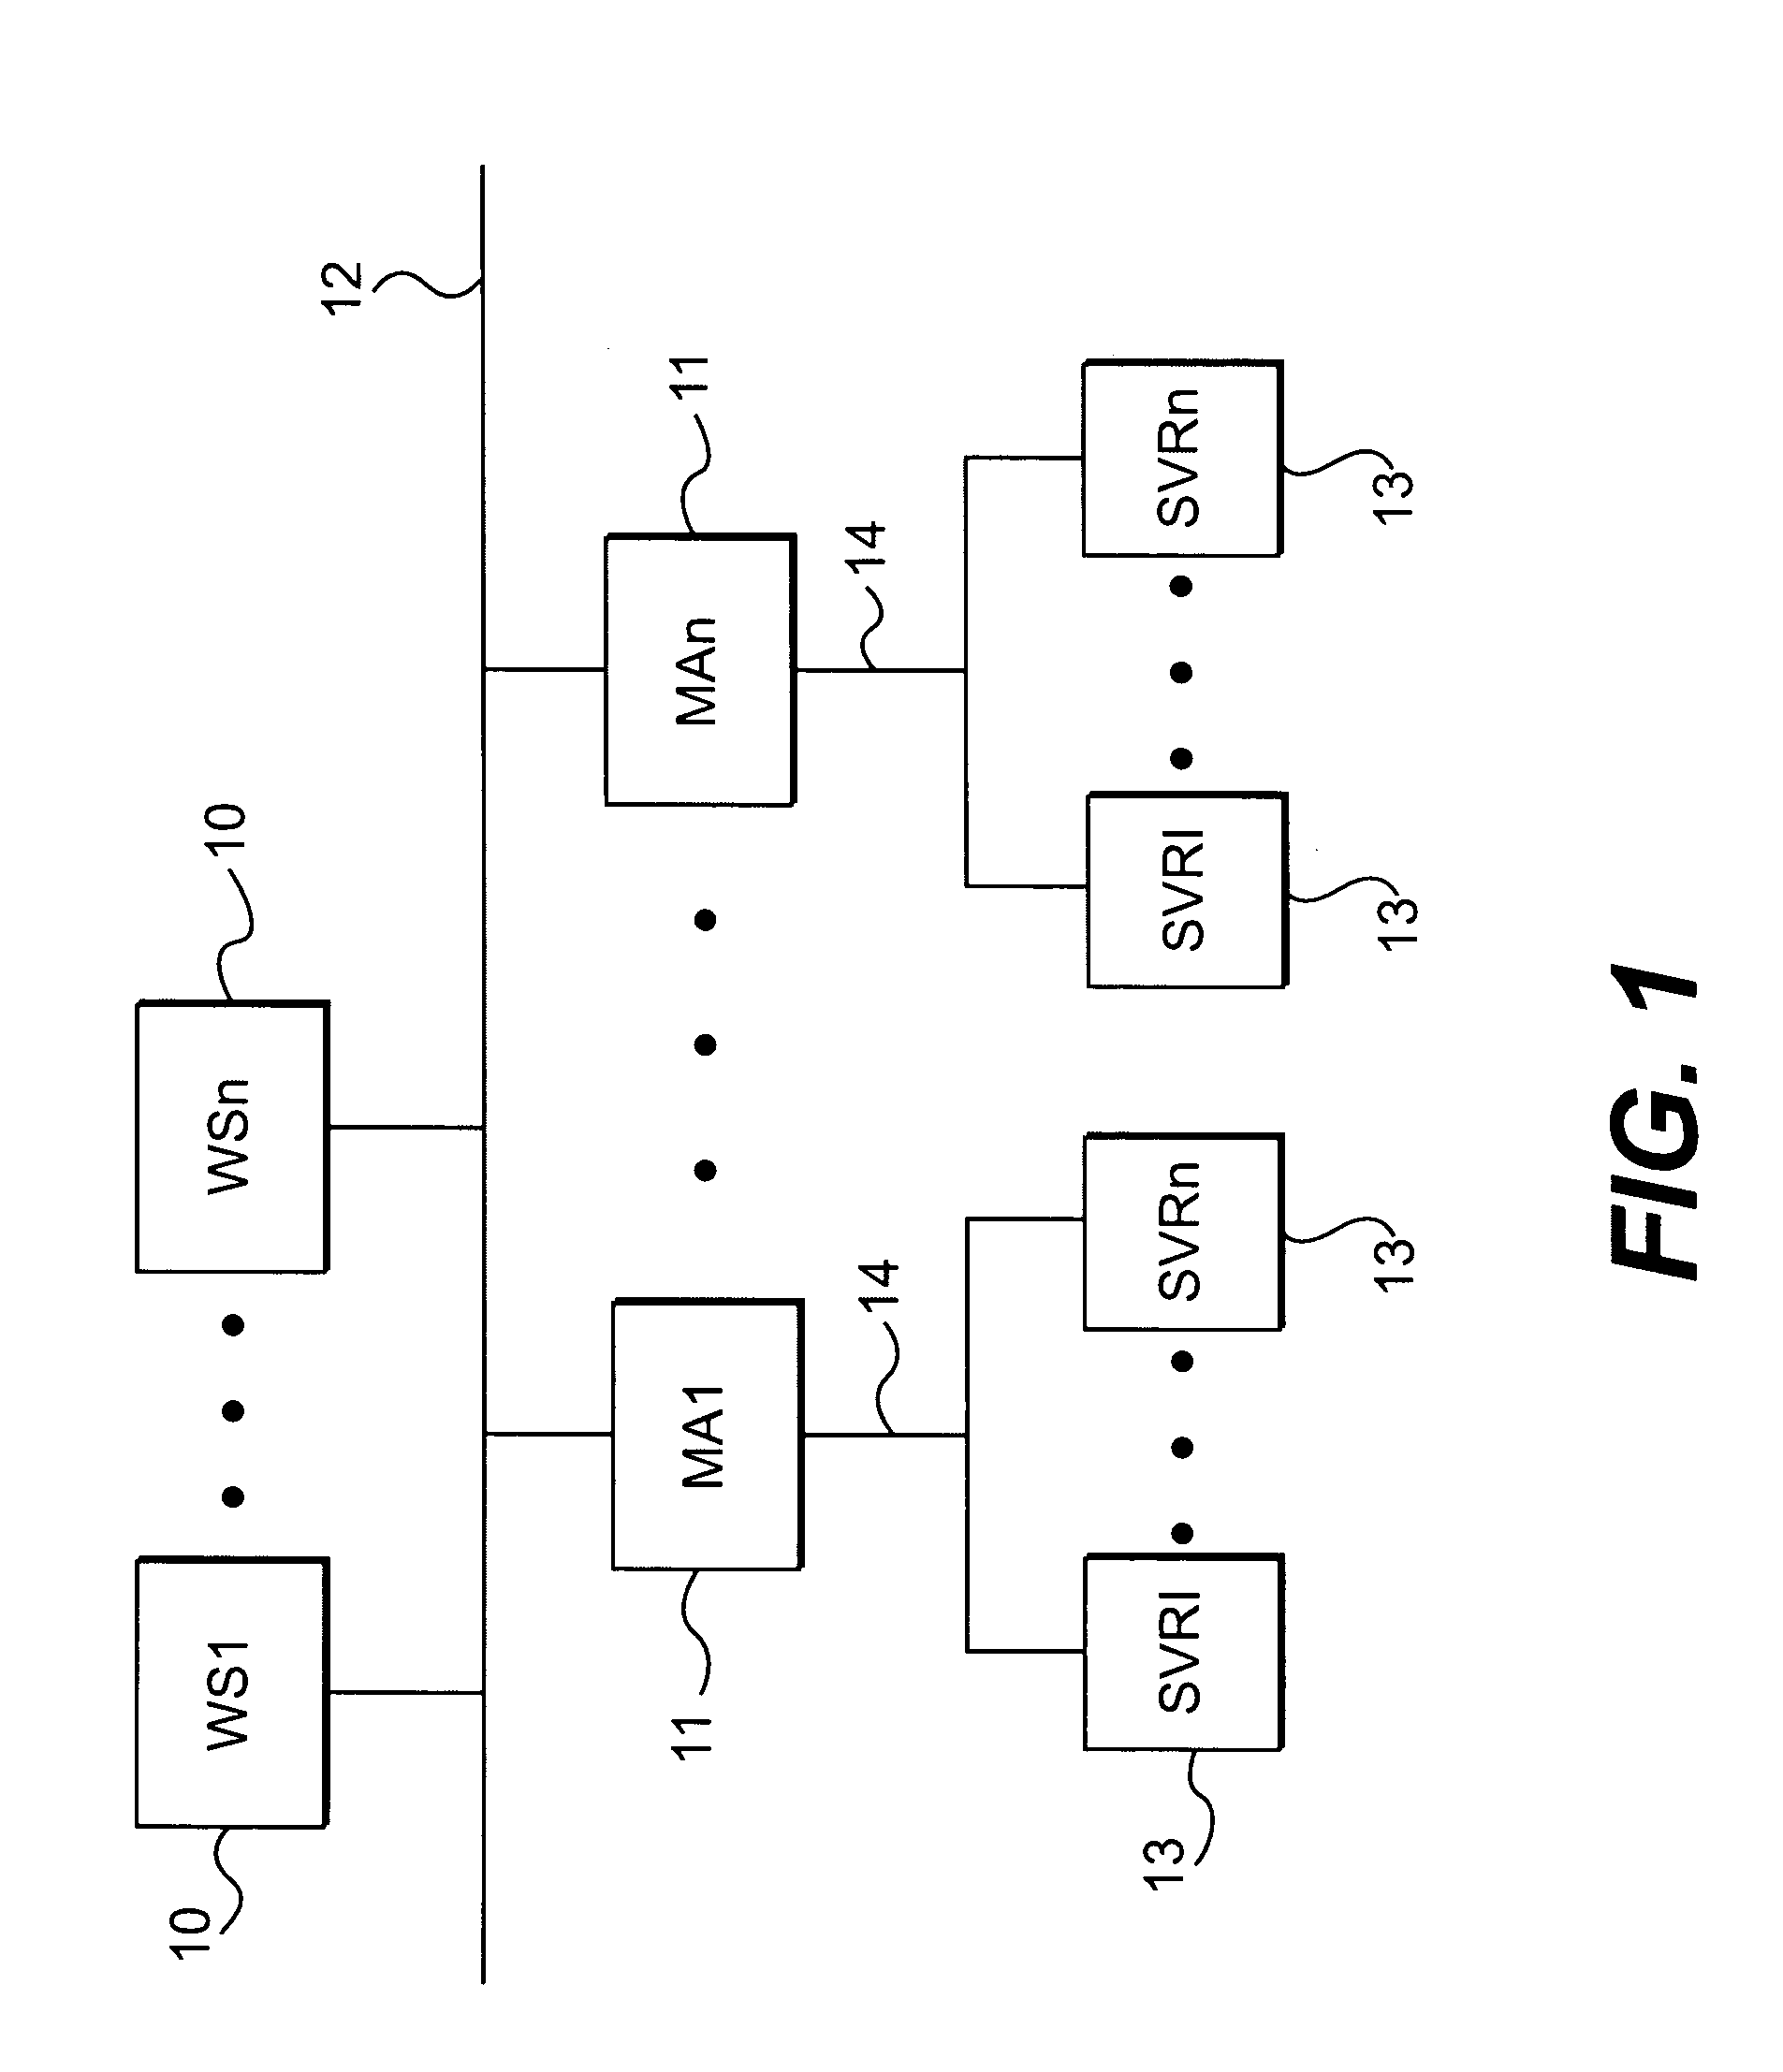 Method and apparatus for discovery and installation of network devices through a network